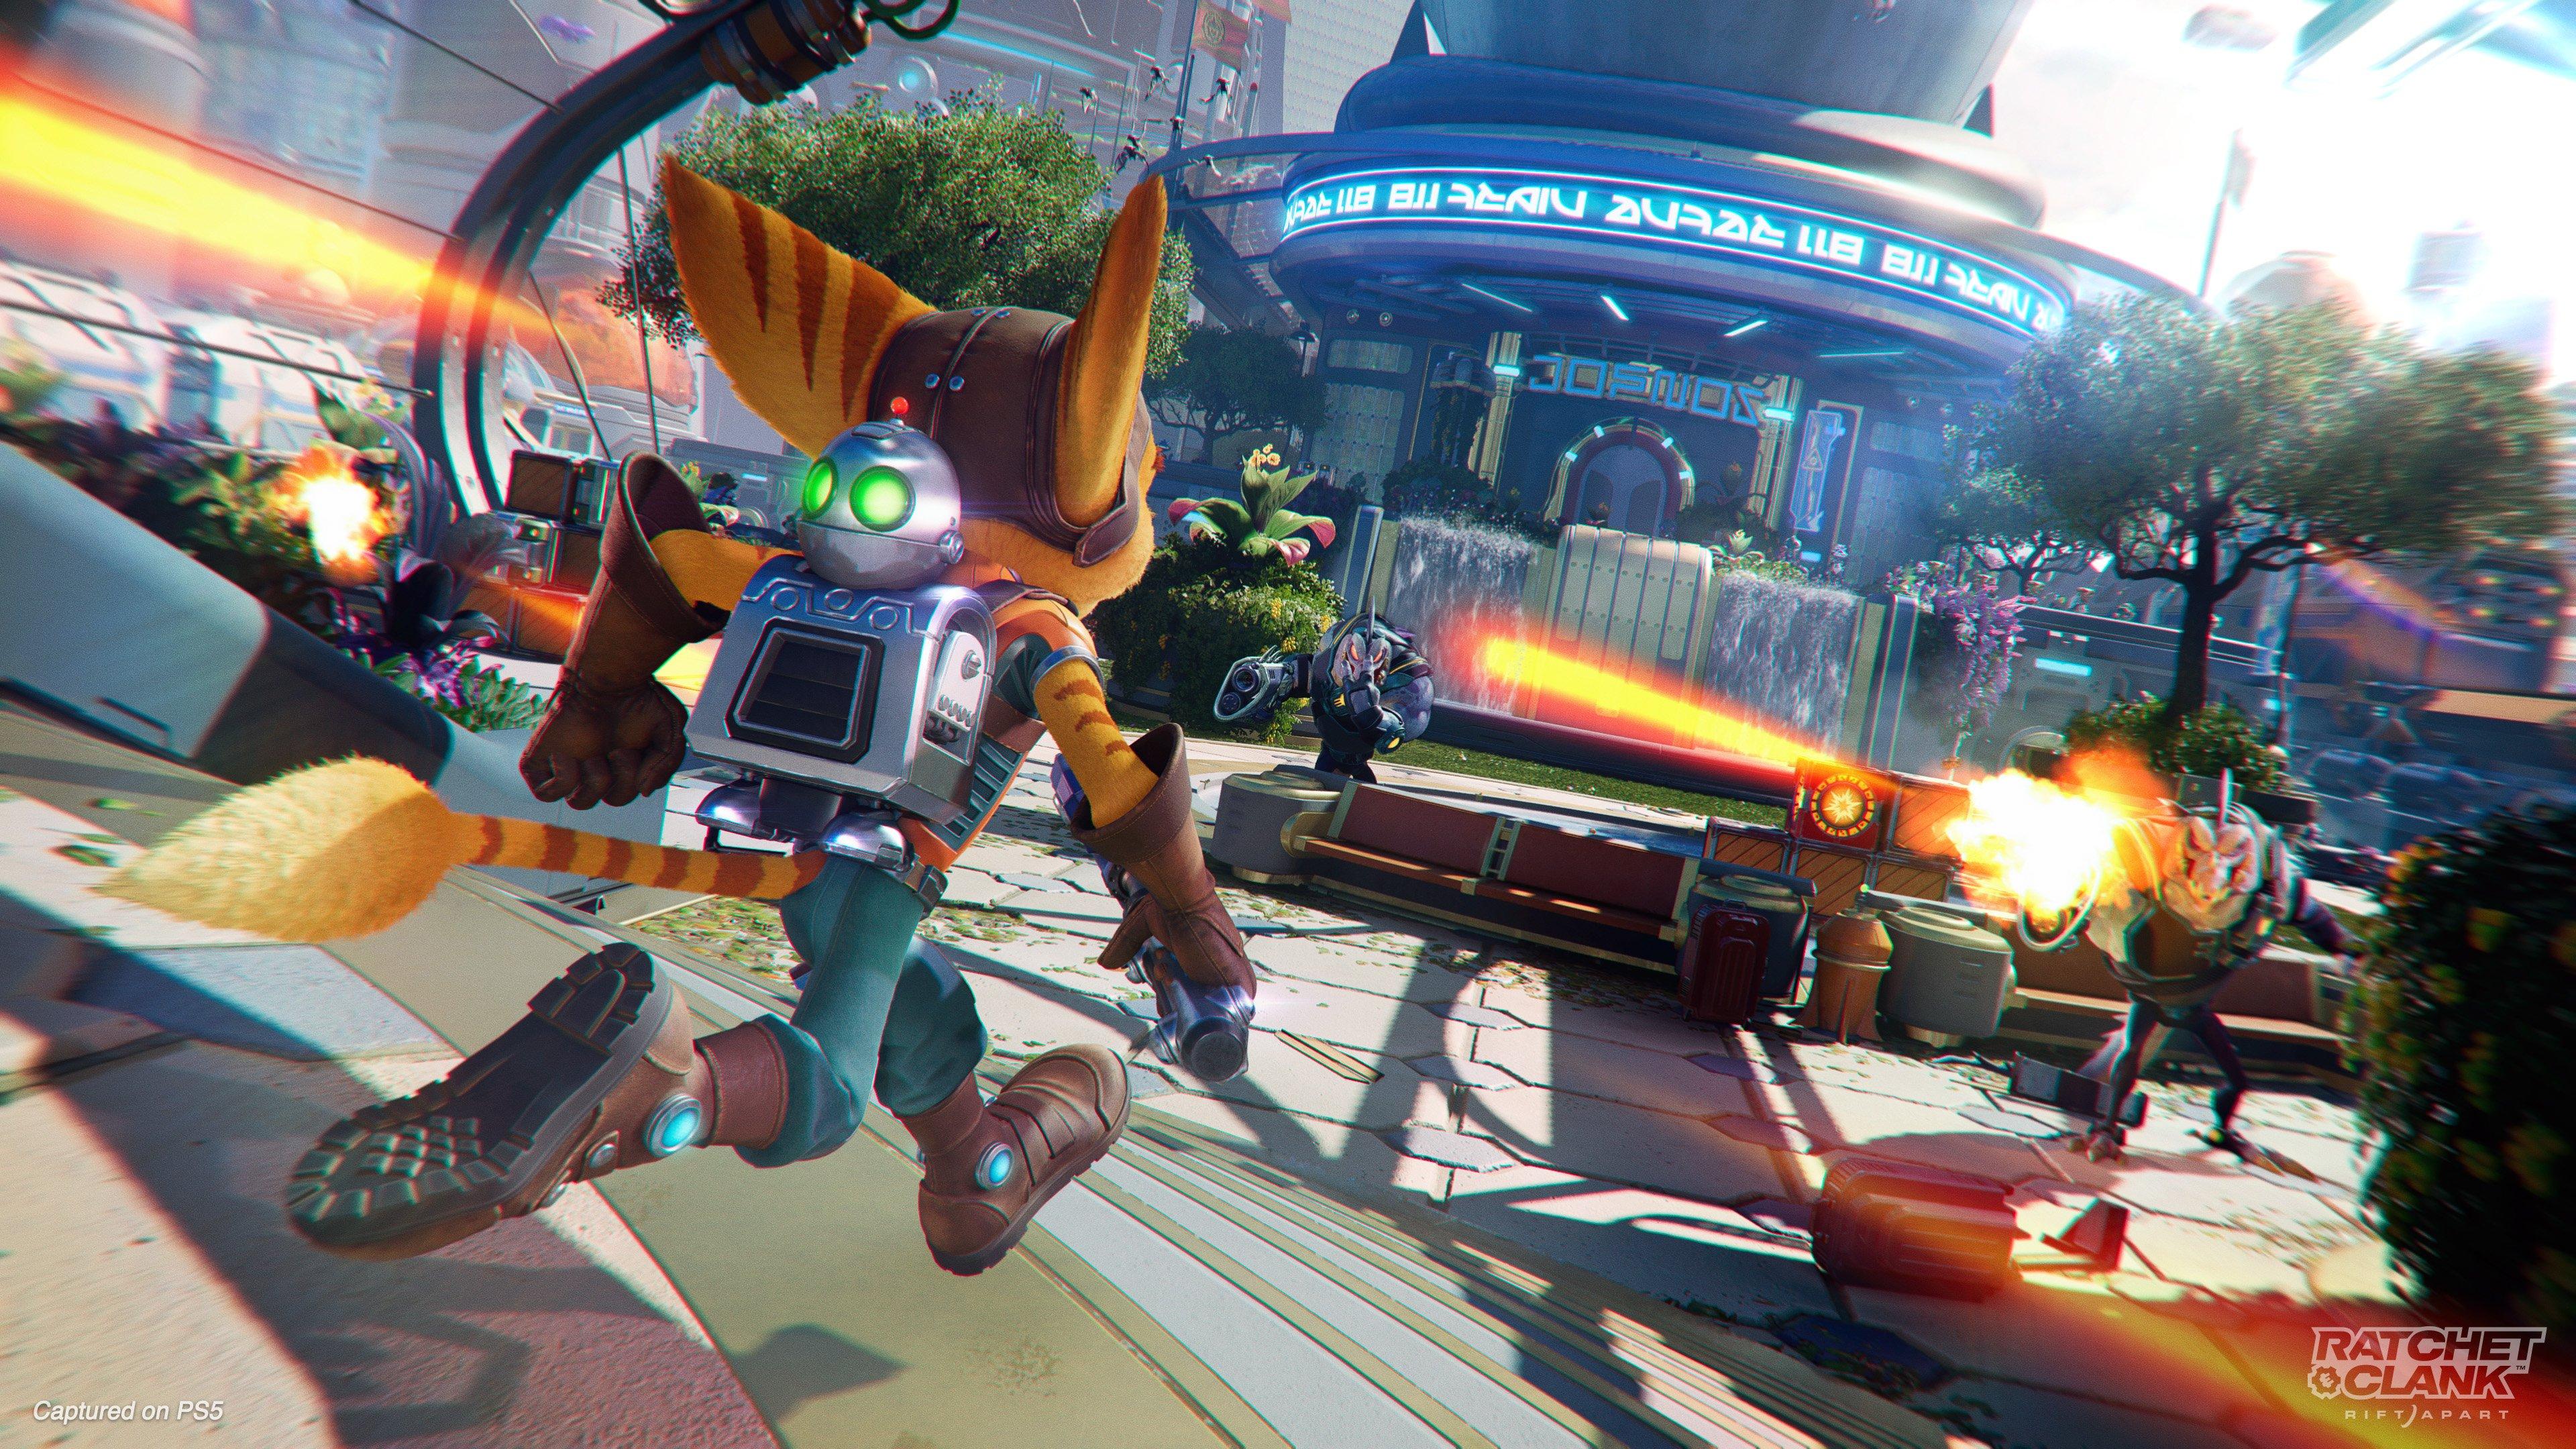 Ratchet and Clank FREE on PS4 and PS5 - Play at Home release date